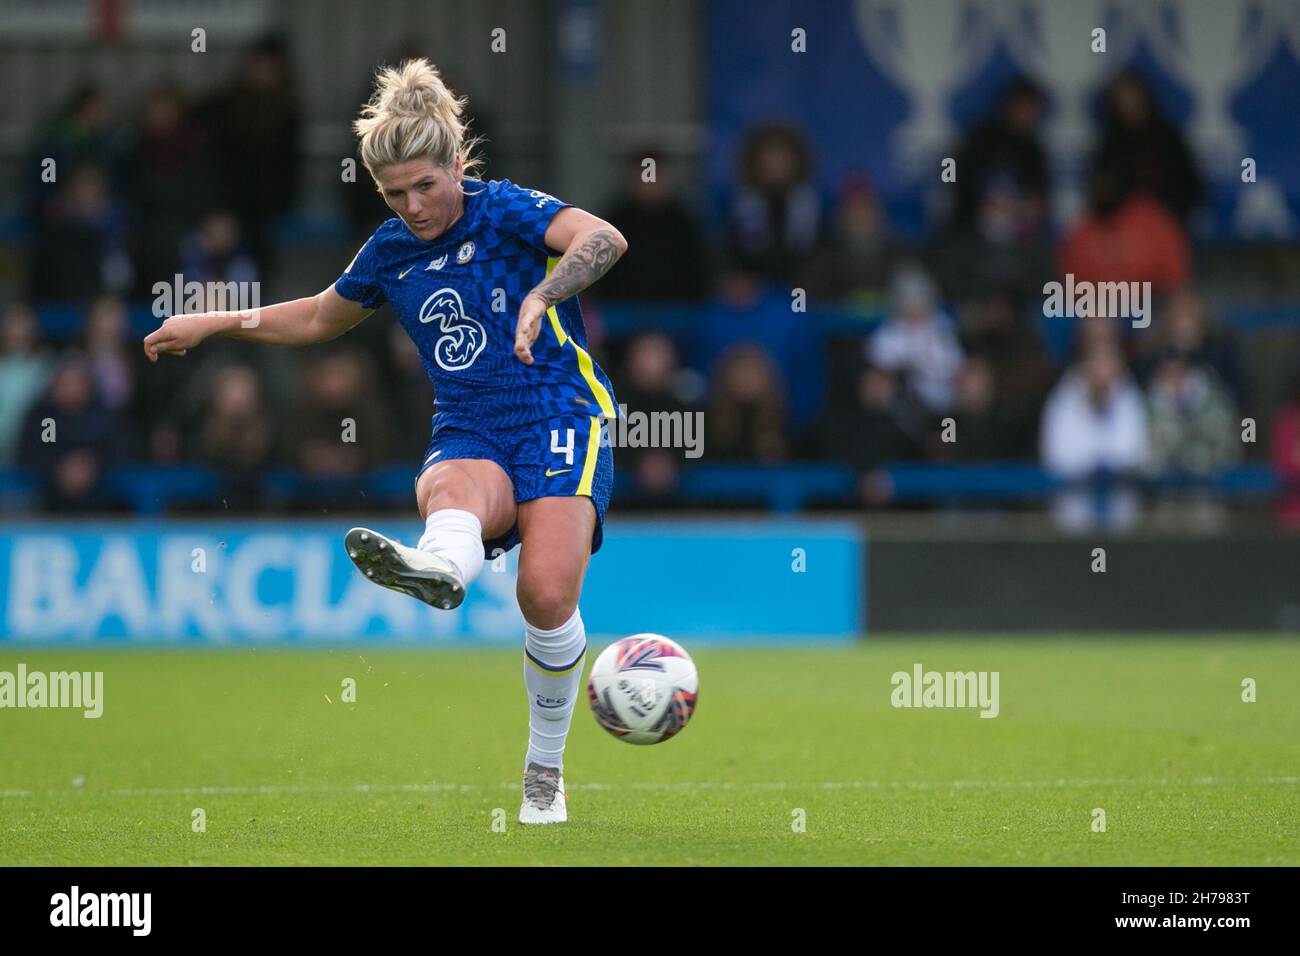 London, UK. 21st Nov, 2021. LONDON, UK. NOVEMBER 21ST : Millie Bright of Chelsea FC controls the ball during the 2021-22 FA Womens Superleague fixture between Chelsea FC and Birmingham City at Kingsmeadow. Credit: Federico Guerra Morán/Alamy Live News Stock Photo